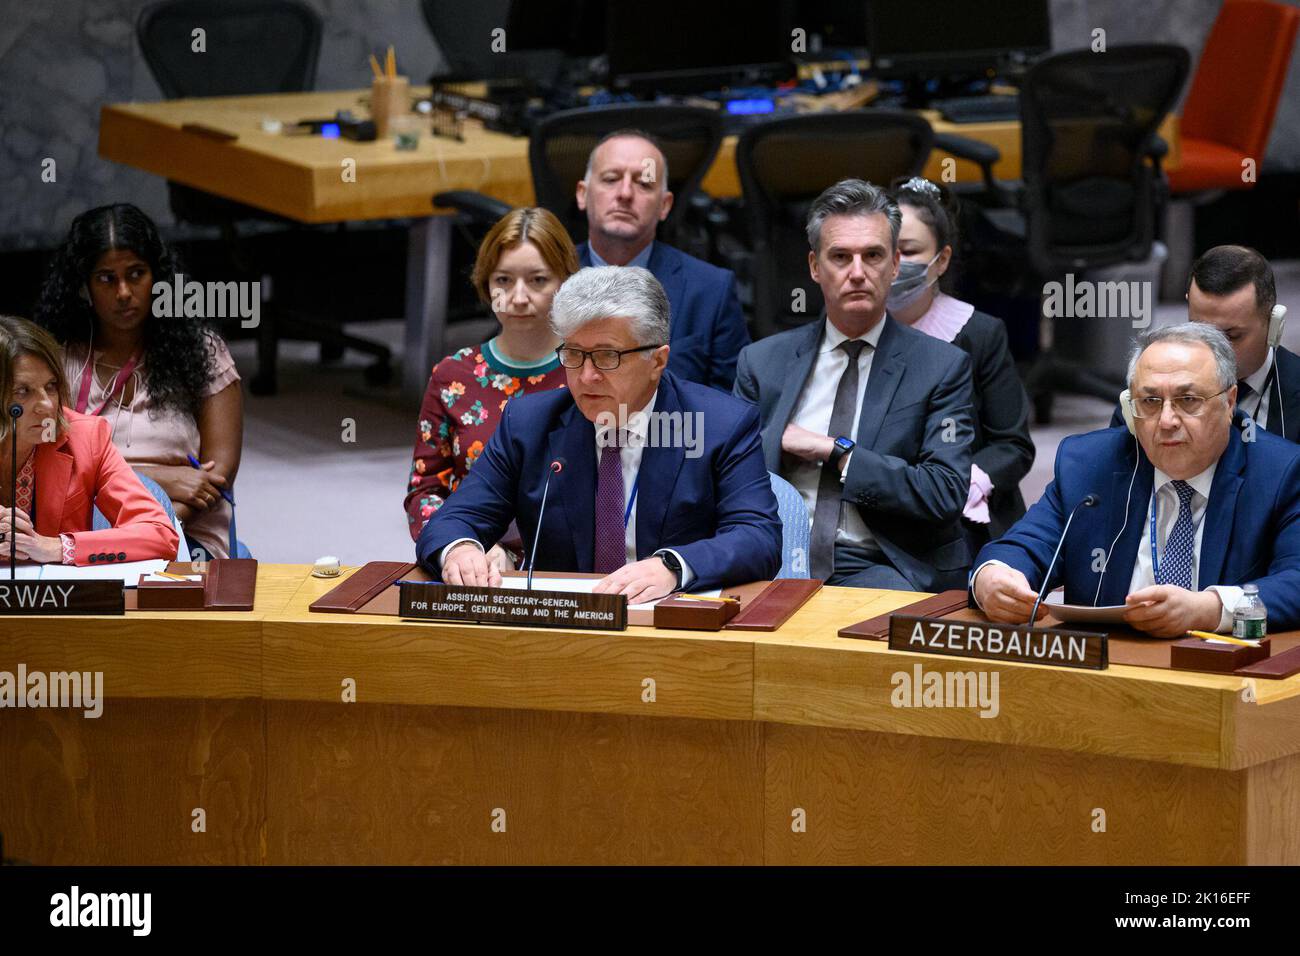 United Nations. 16th Sep, 2022. (220916) -- UNITED NATIONS, Sept. 16, 2022 (Xinhua) -- UN assistant secretary-general for Europe, Central Asia and Americas, Miroslav Jenca (C), speaks at a Security Council meeting on tensions between Armenia and Azerbaijan at the UN Headquarters in New York on Sept. 15, 2022. Jenca on Thursday stressed the need for a peaceful settlement of the Armenia-Azerbaijan conflict. (Loey Felipe/UN Photo/Handout via Xinhua) Credit: Xinhua/Alamy Live News Stock Photo